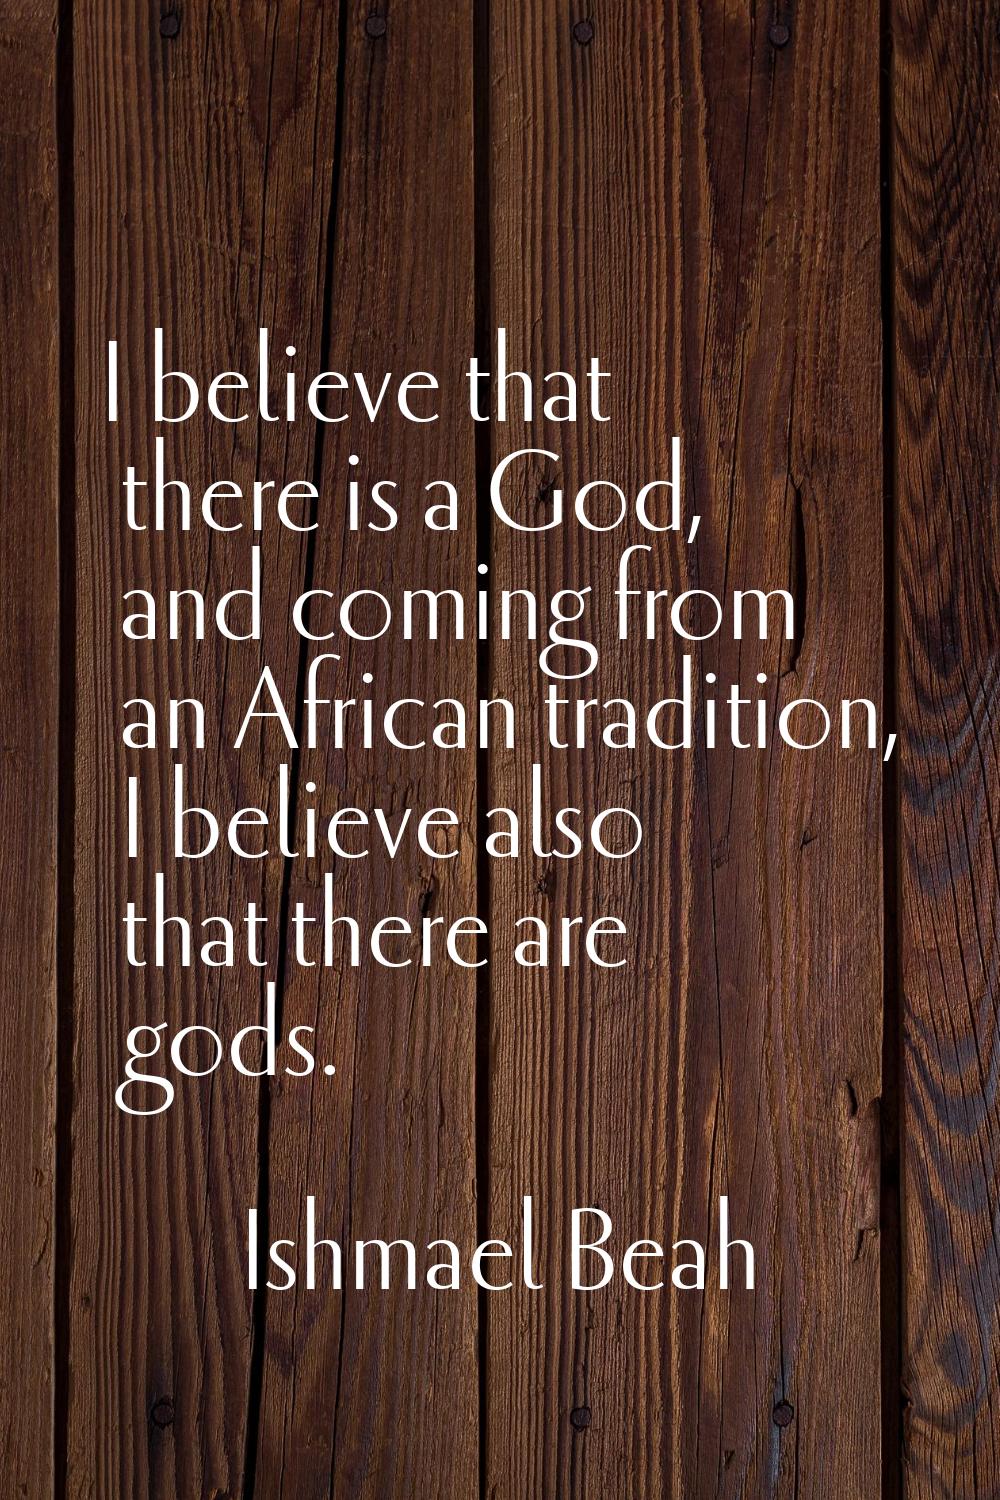 I believe that there is a God, and coming from an African tradition, I believe also that there are 